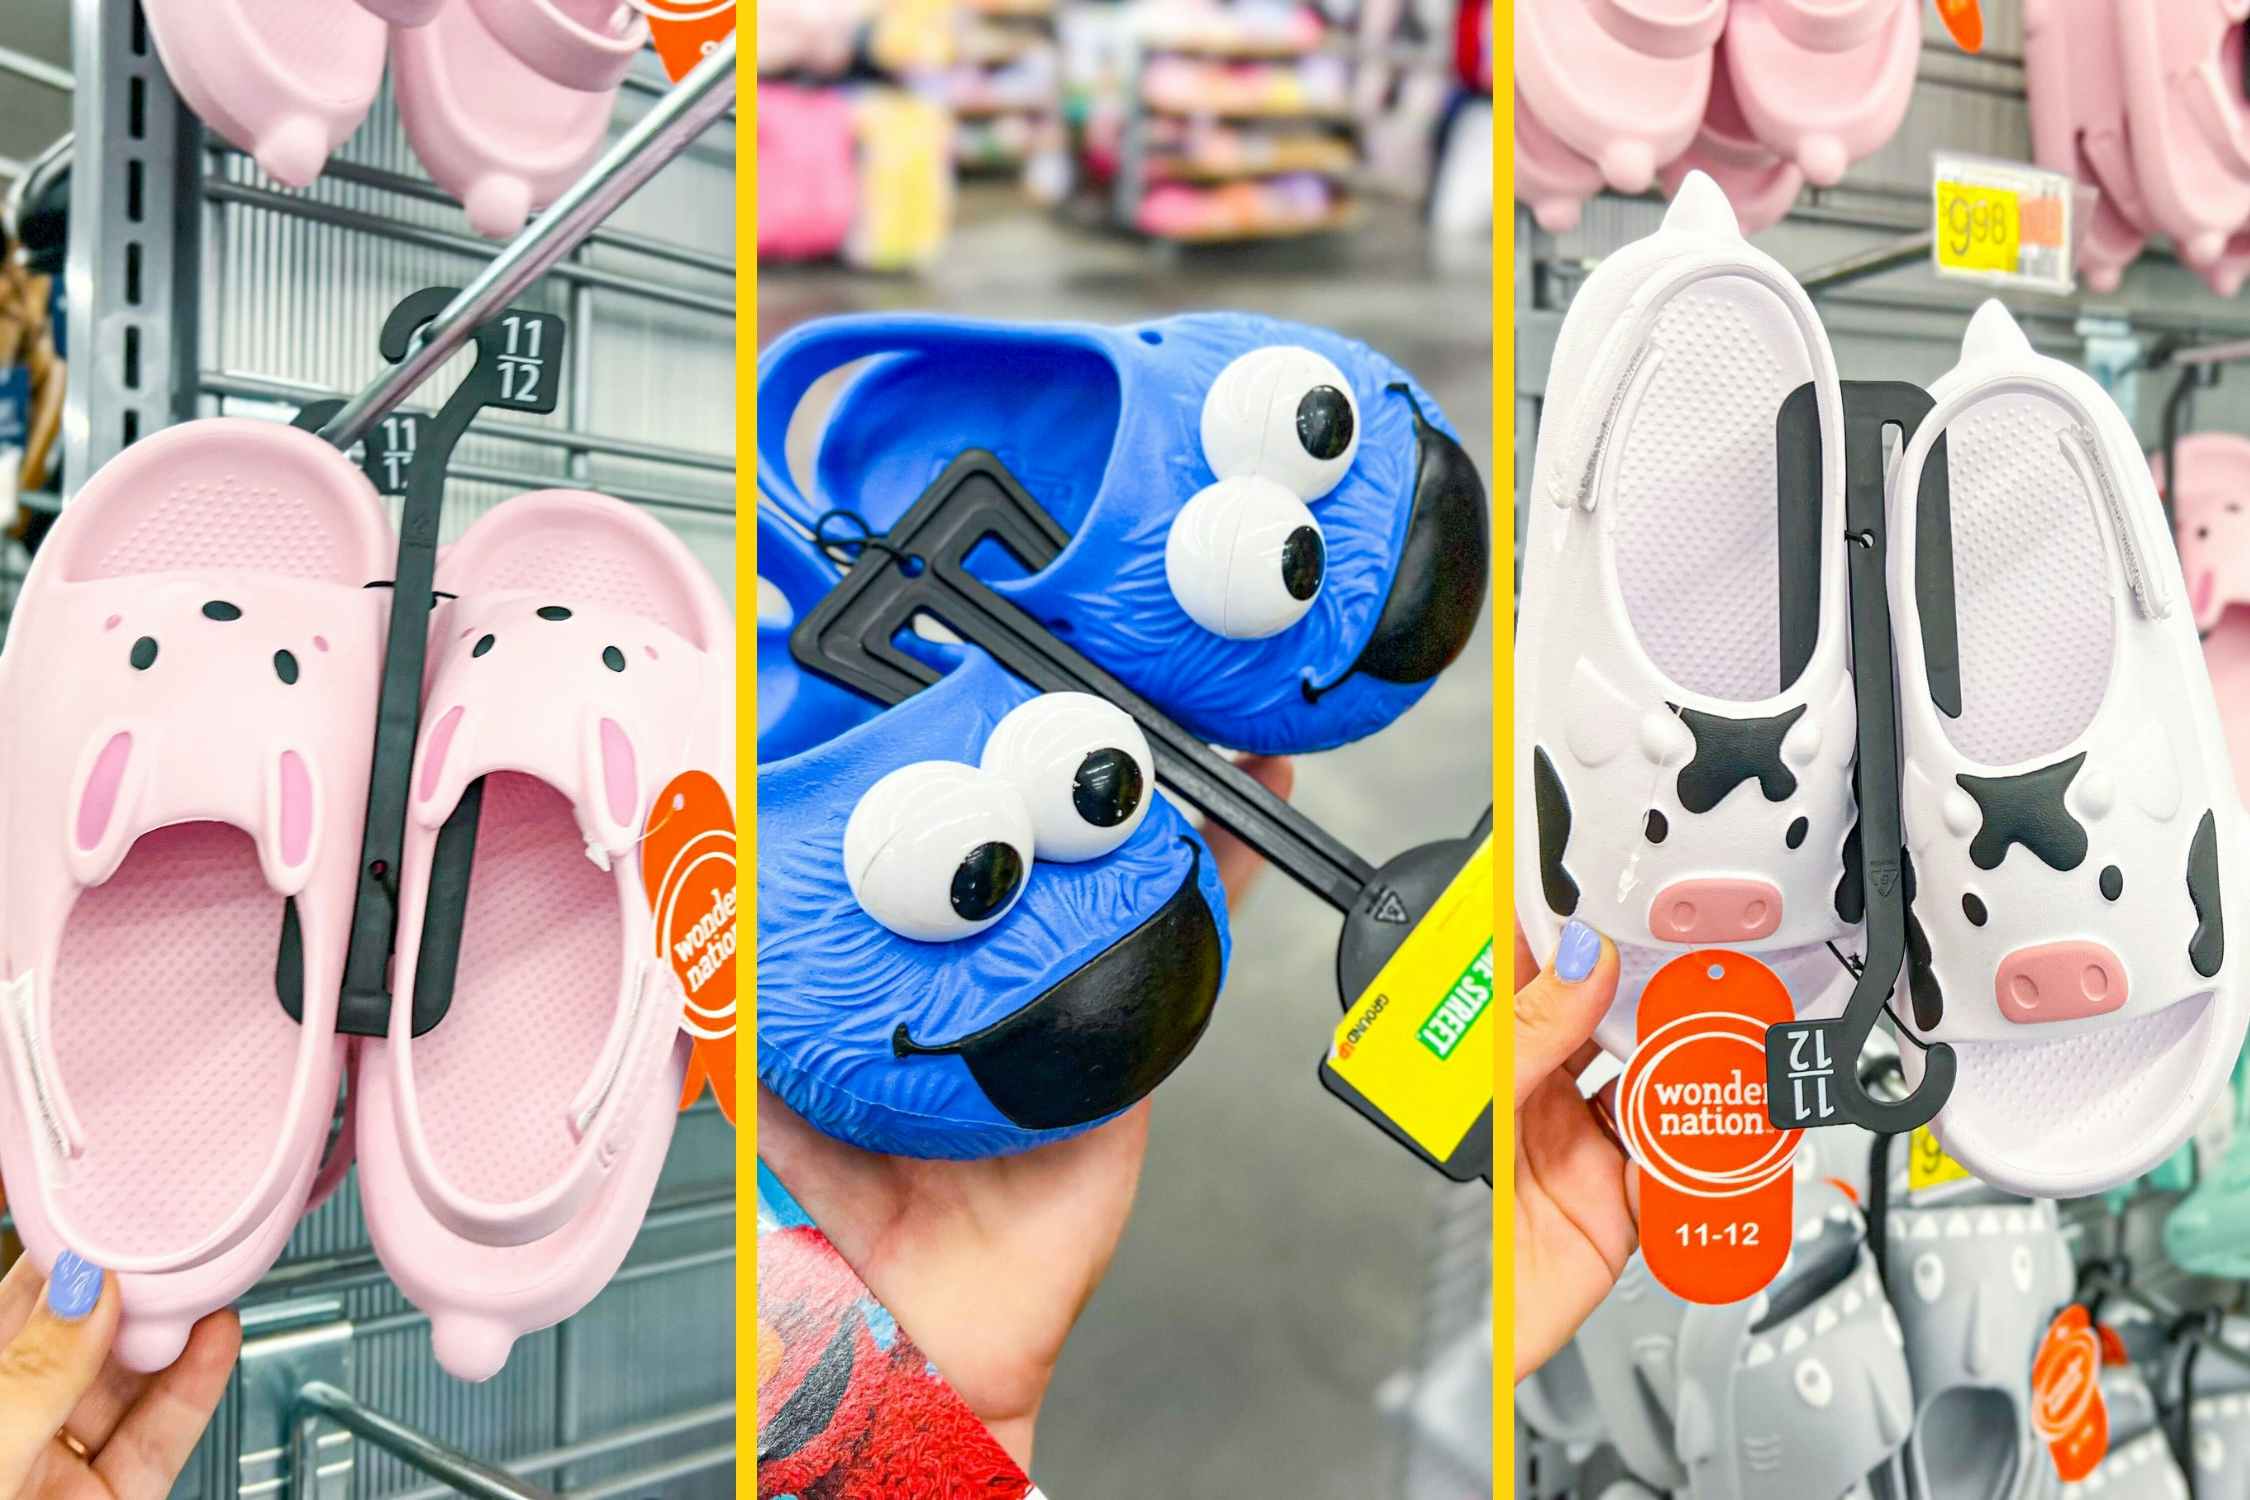 Waterproof Sandals for Kids, Toddlers, and Infants, Under $10 at Walmart